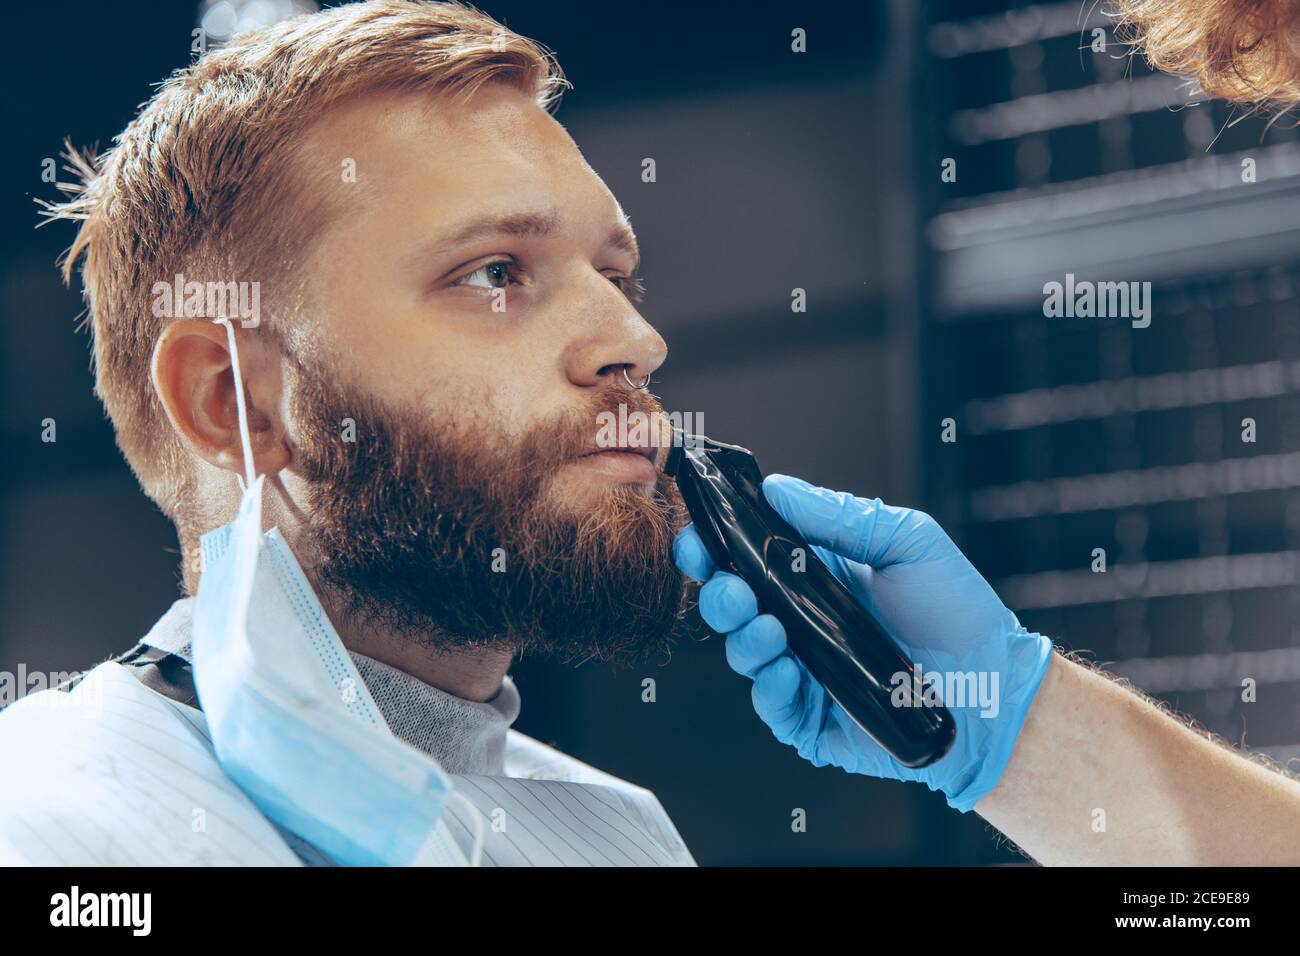 Close up man getting hair cut at the barbershop wearing mask during coronavirus pandemic. Professional barber wearing gloves. Covid-19, beauty, selfcare, style, healthcare and medicine concept. Stock Photo